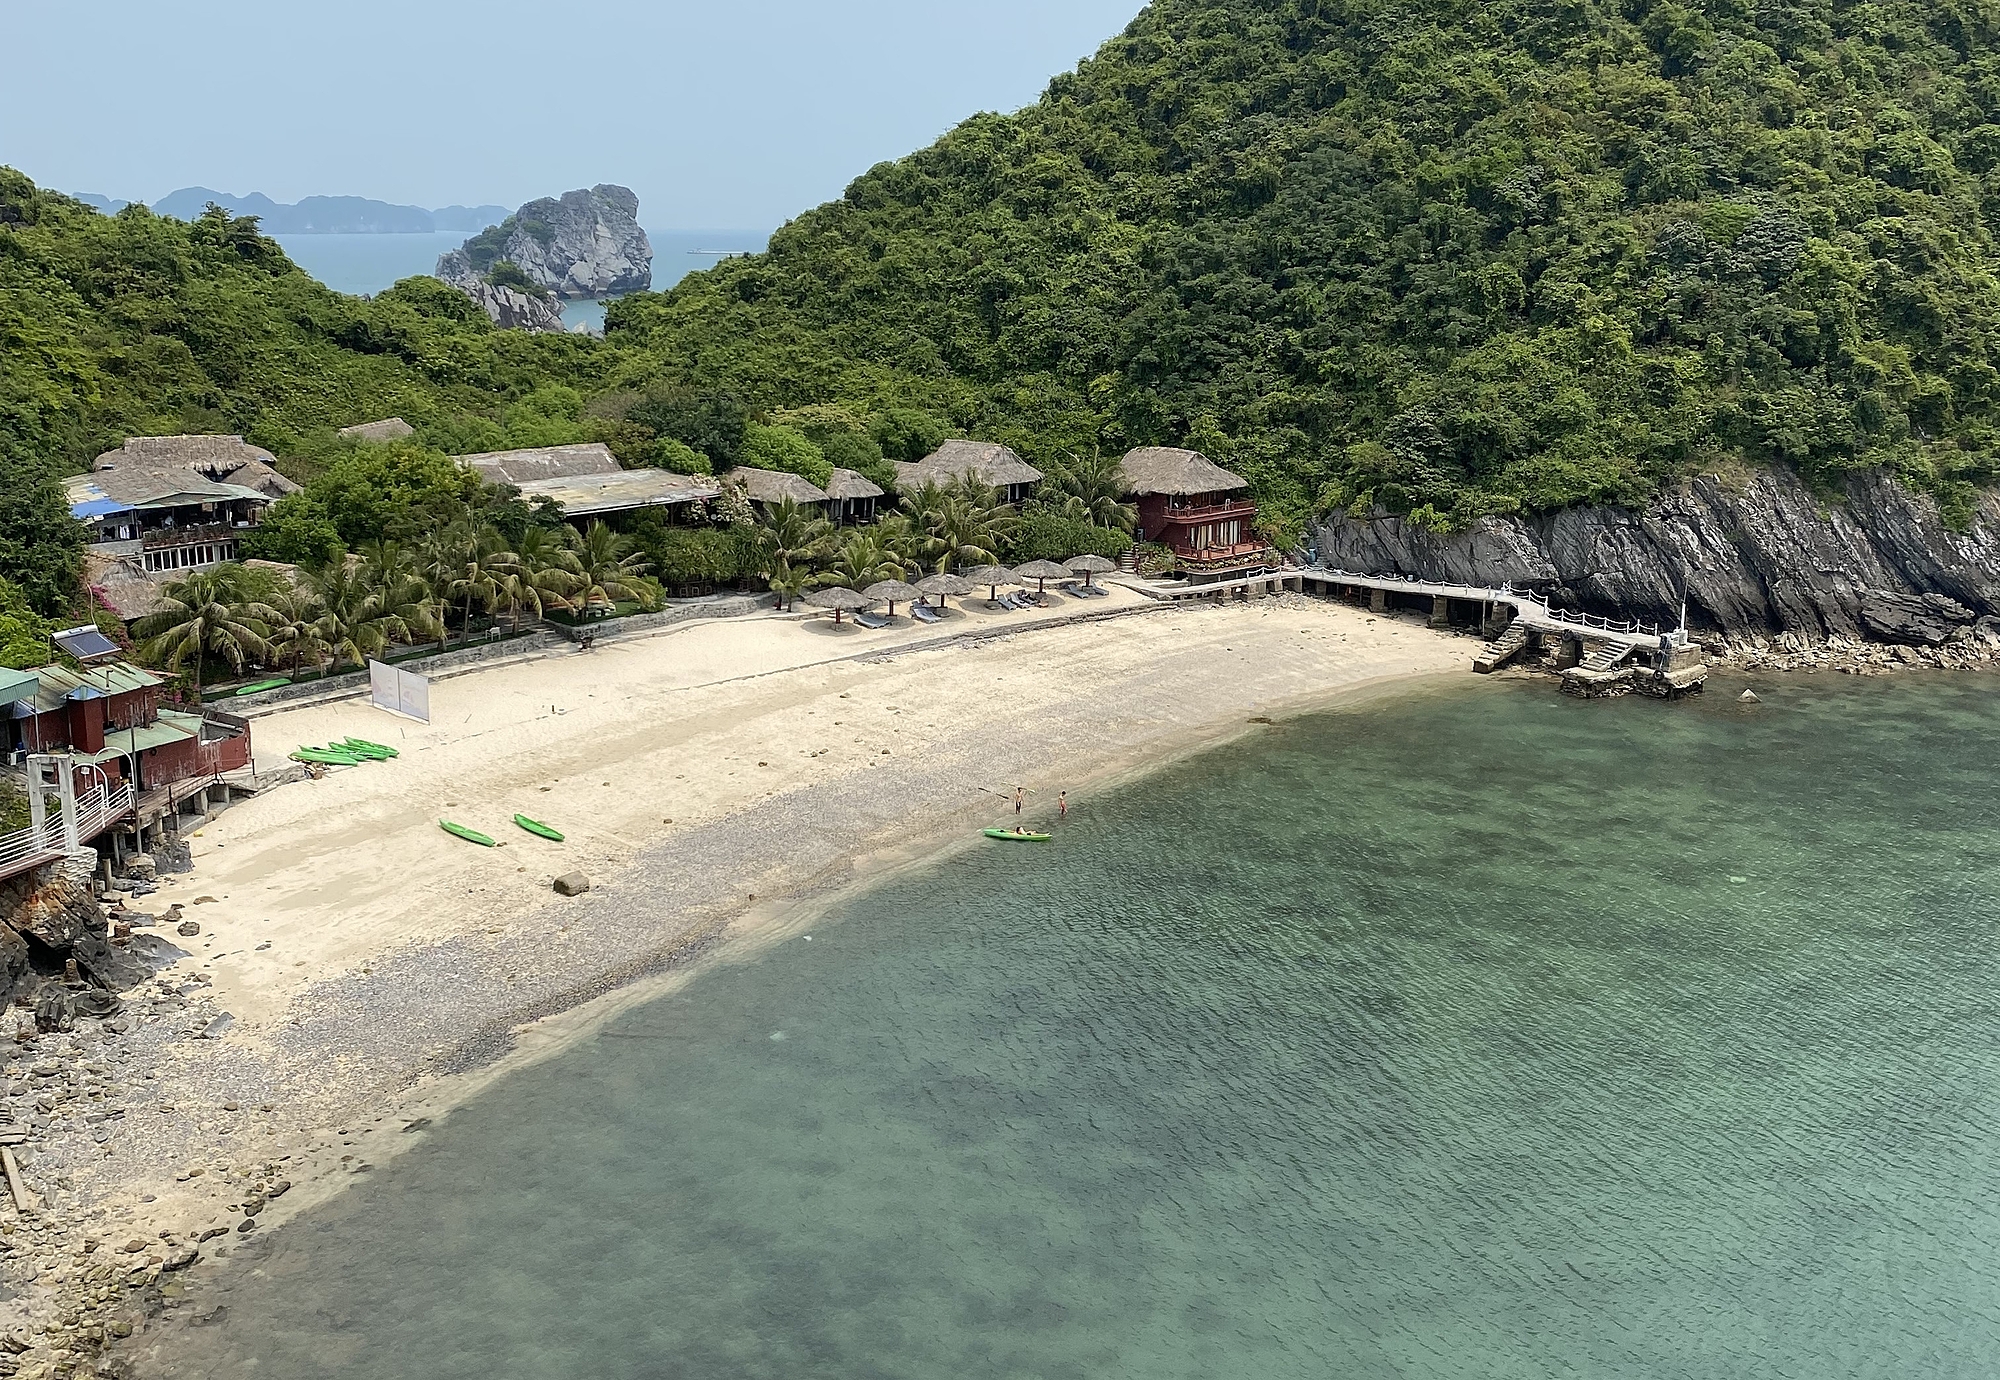 Monkey Island’s private beach with kayaks available to guests. Photo by Darren Barnard